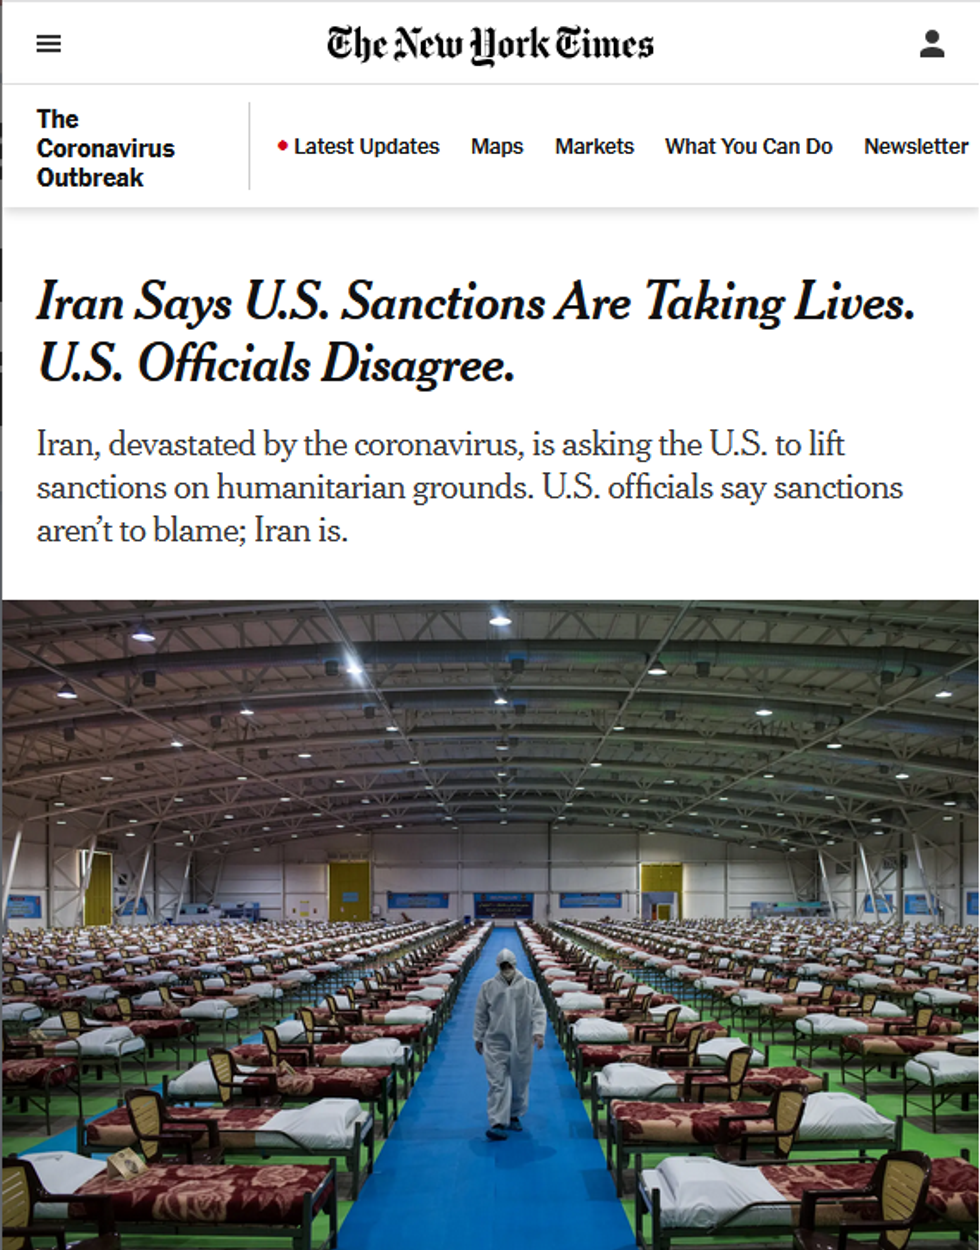 NYT: Iran Says U.S. Sanctions Are Taking Lives. U.S. Officials Disagree.